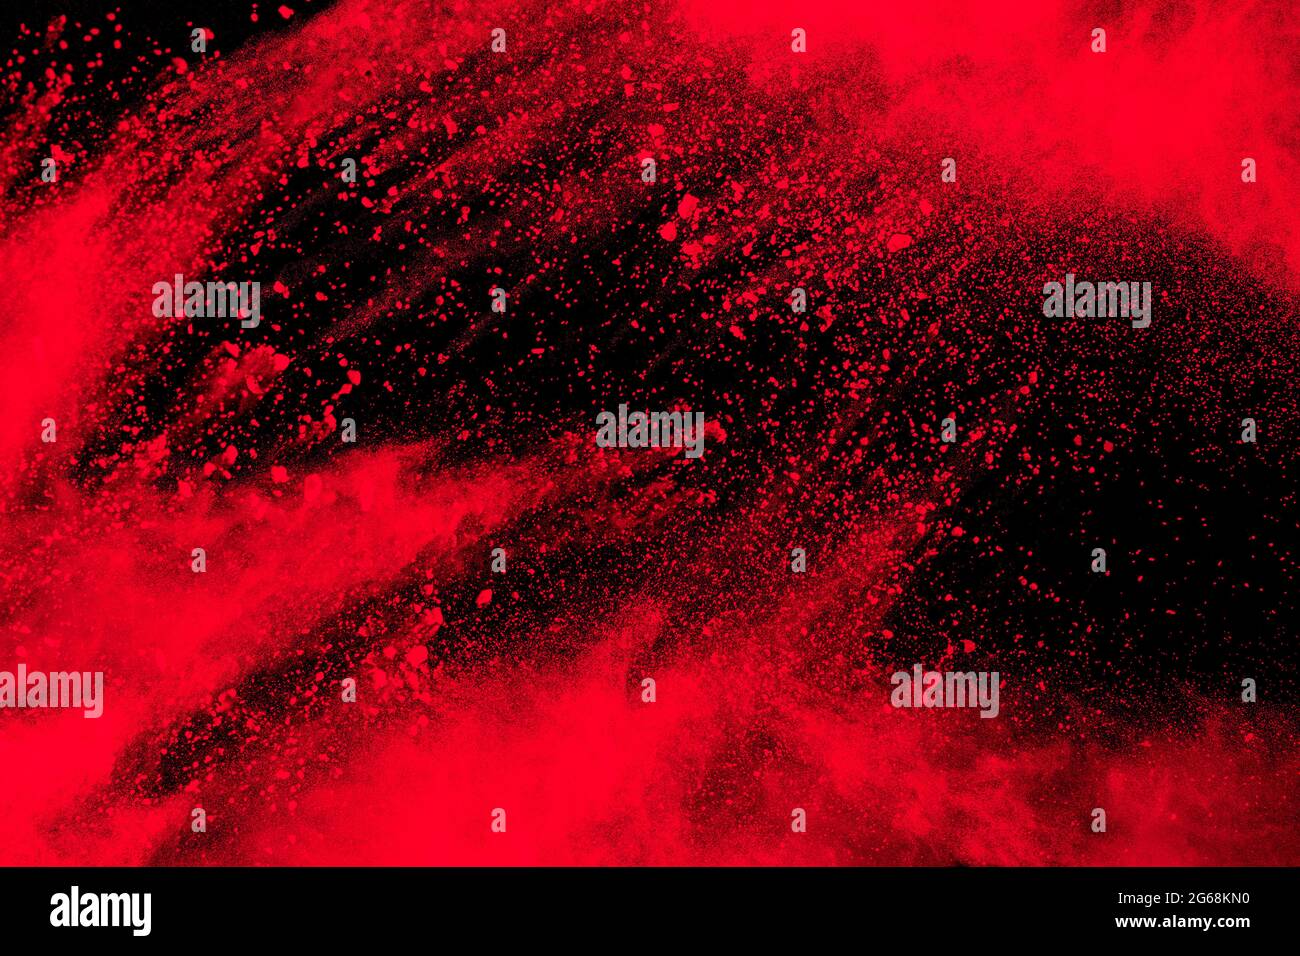 Red particle explosion on black background.Freeze motion of red dust splash. Stock Photo